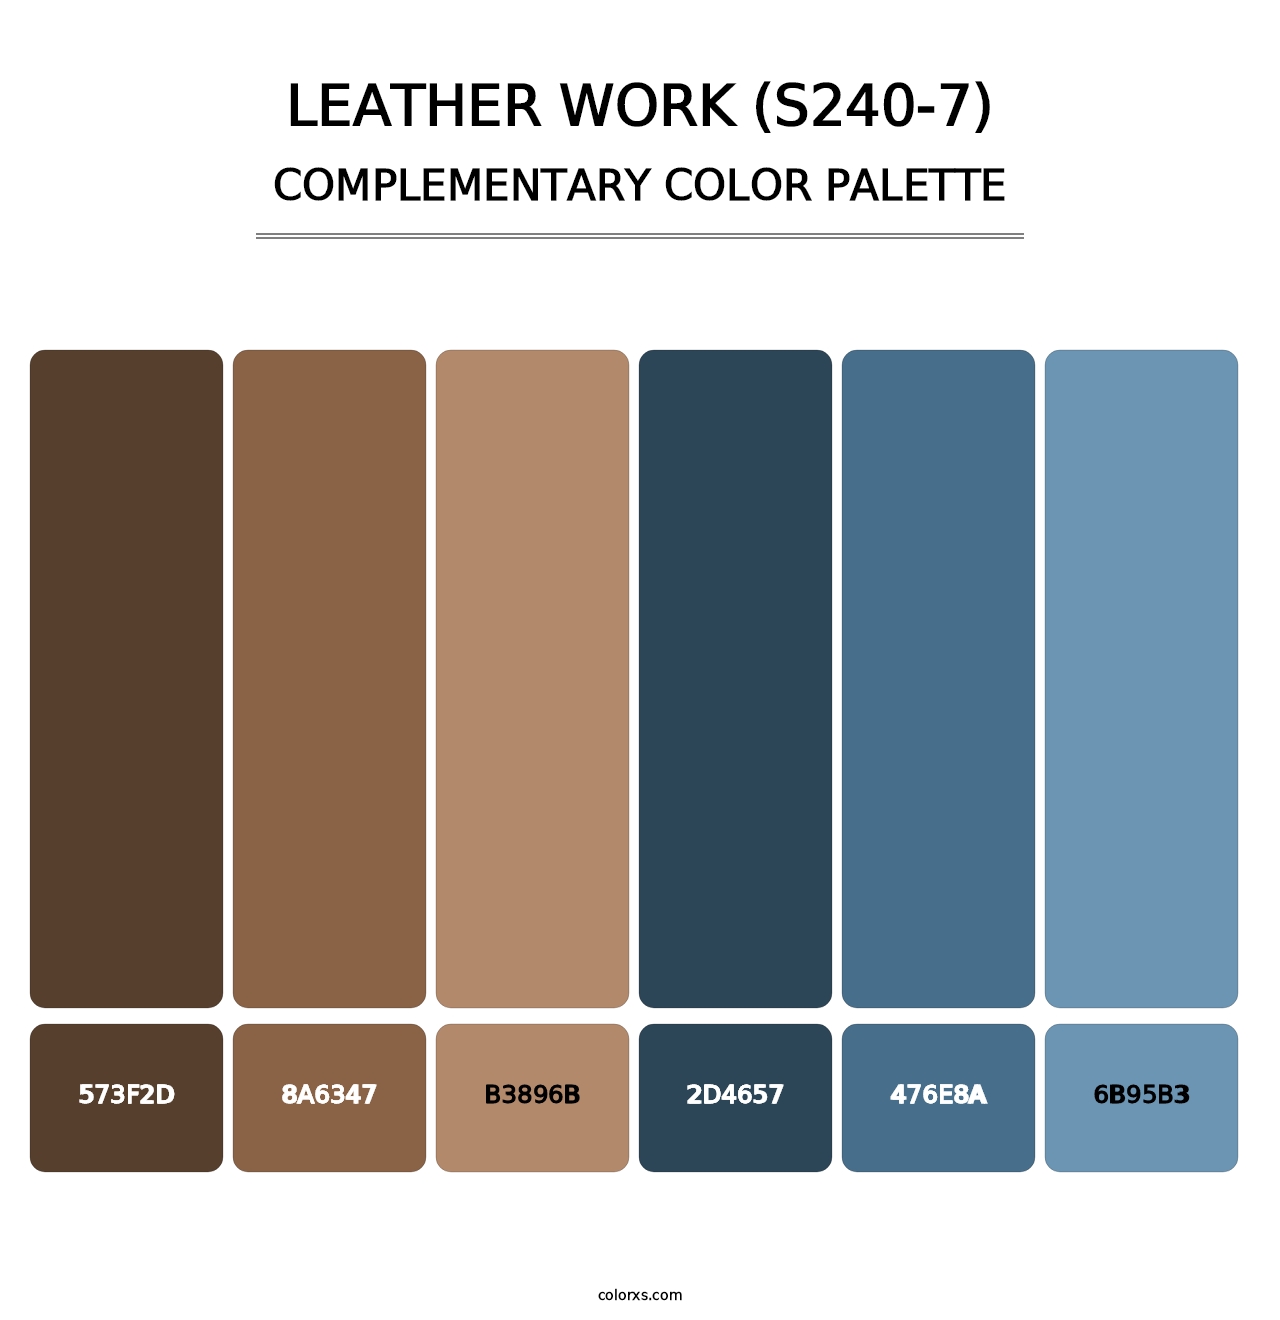 Leather Work (S240-7) - Complementary Color Palette